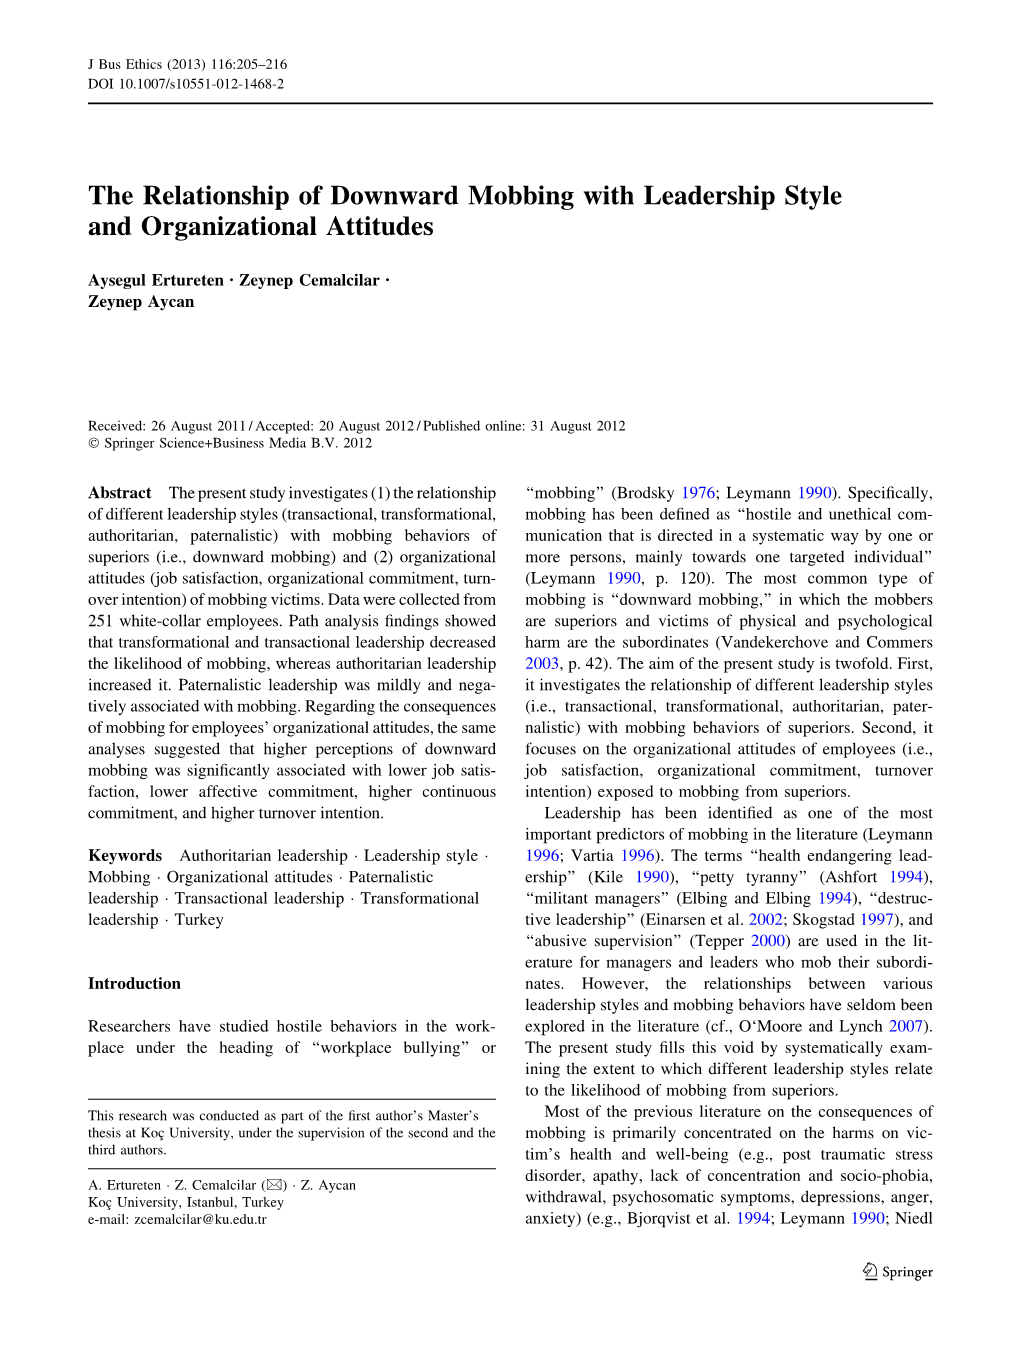 The Relationship of Downward Mobbing with Leadership Style and Organizational Attitudes